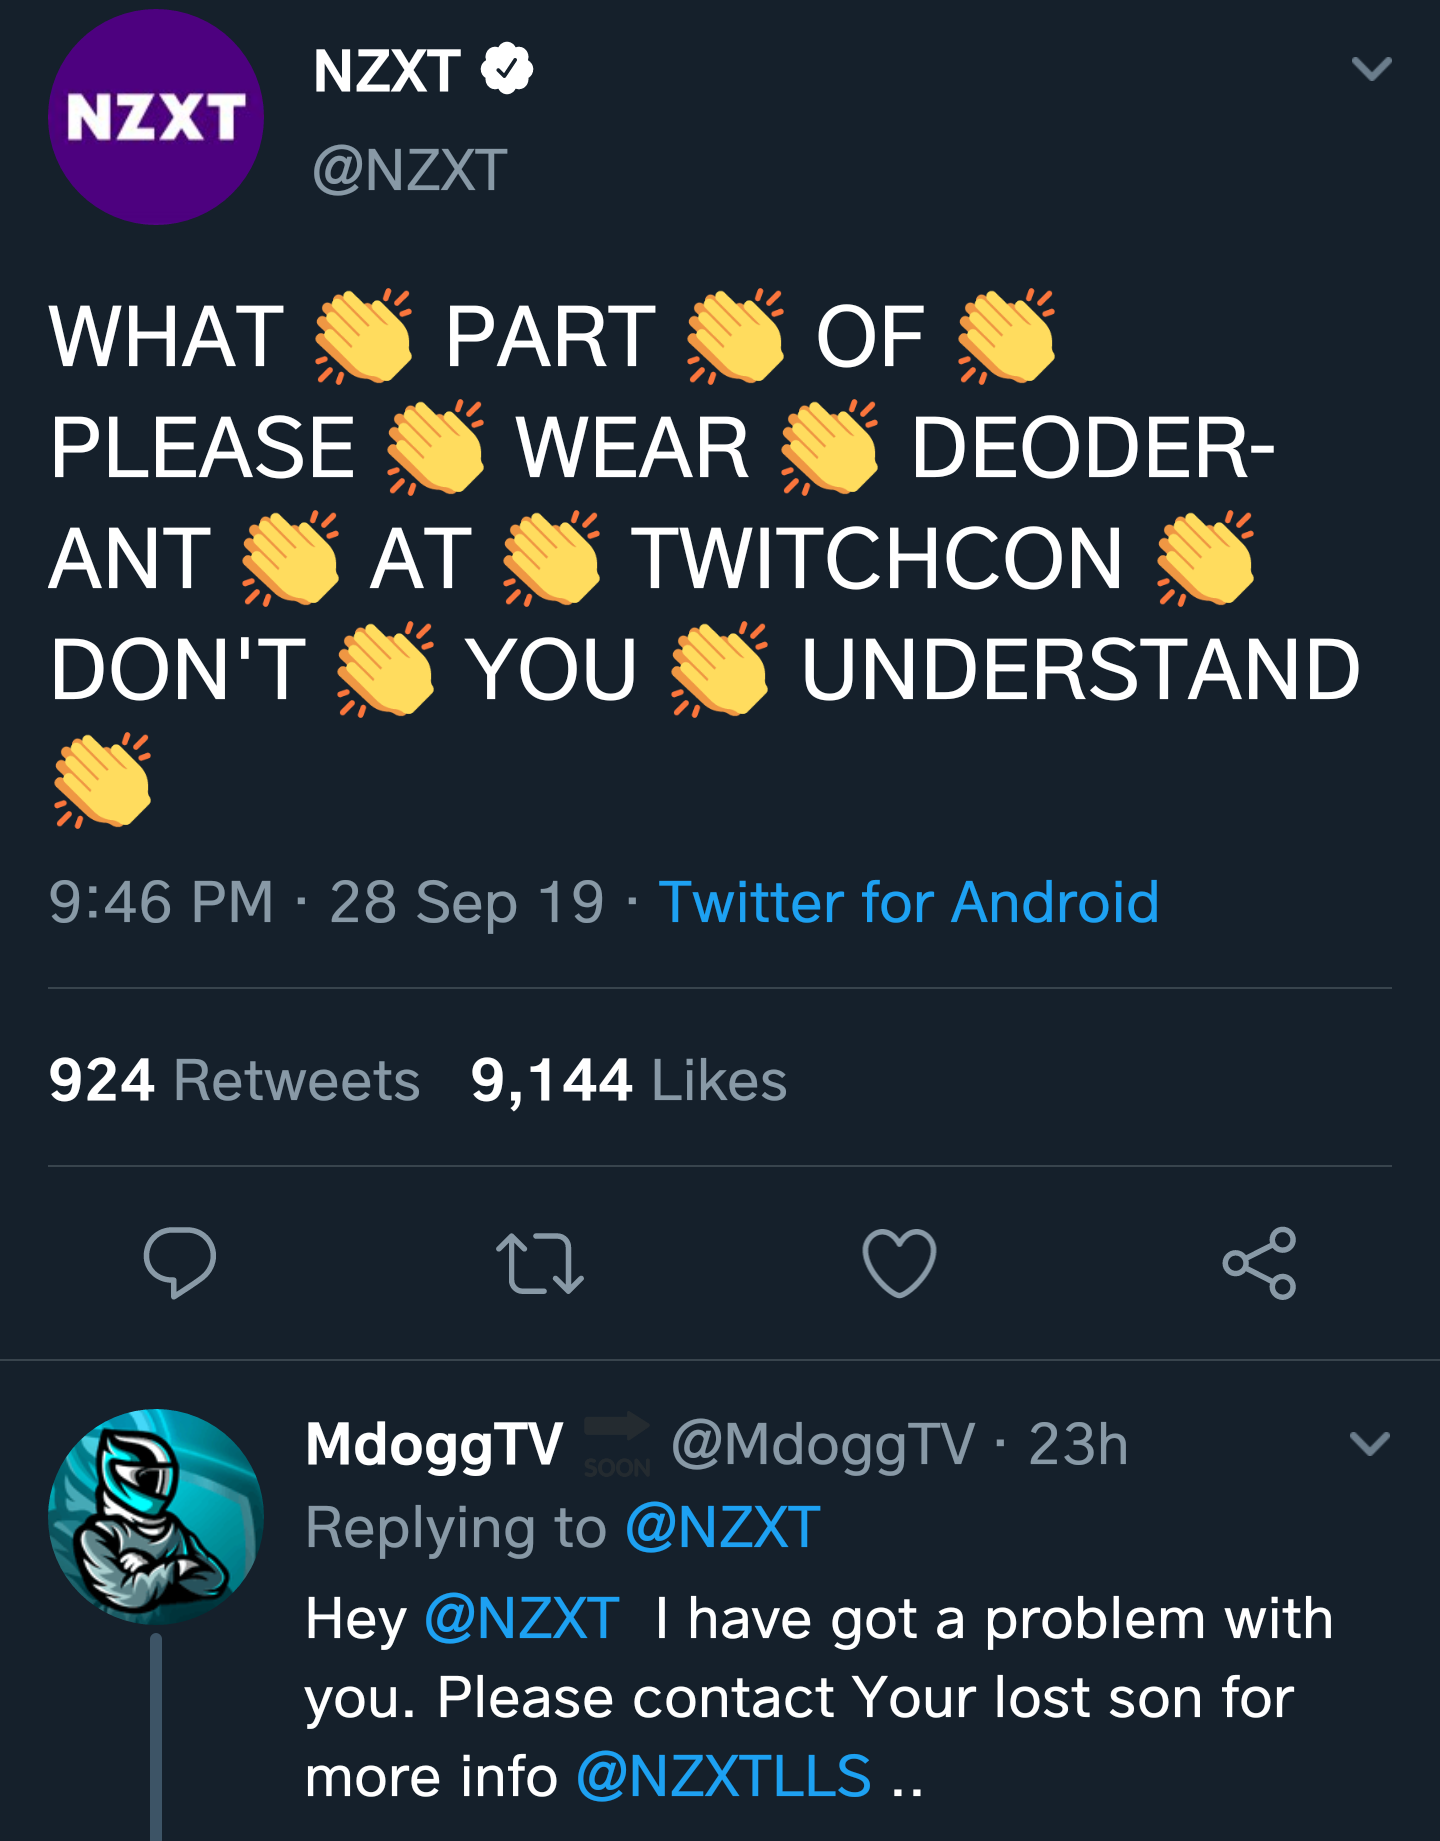 screenshot - Nzxt Nzxt What S Part Of Pleasewear Deoder Ant At Twitchcon Don'T You Understand 28 Sep 19 Twitter for Android 924 9,144 le 22 & MdoggTV 23h Hey I have got a problem with you. Please contact Your lost son for more info ..